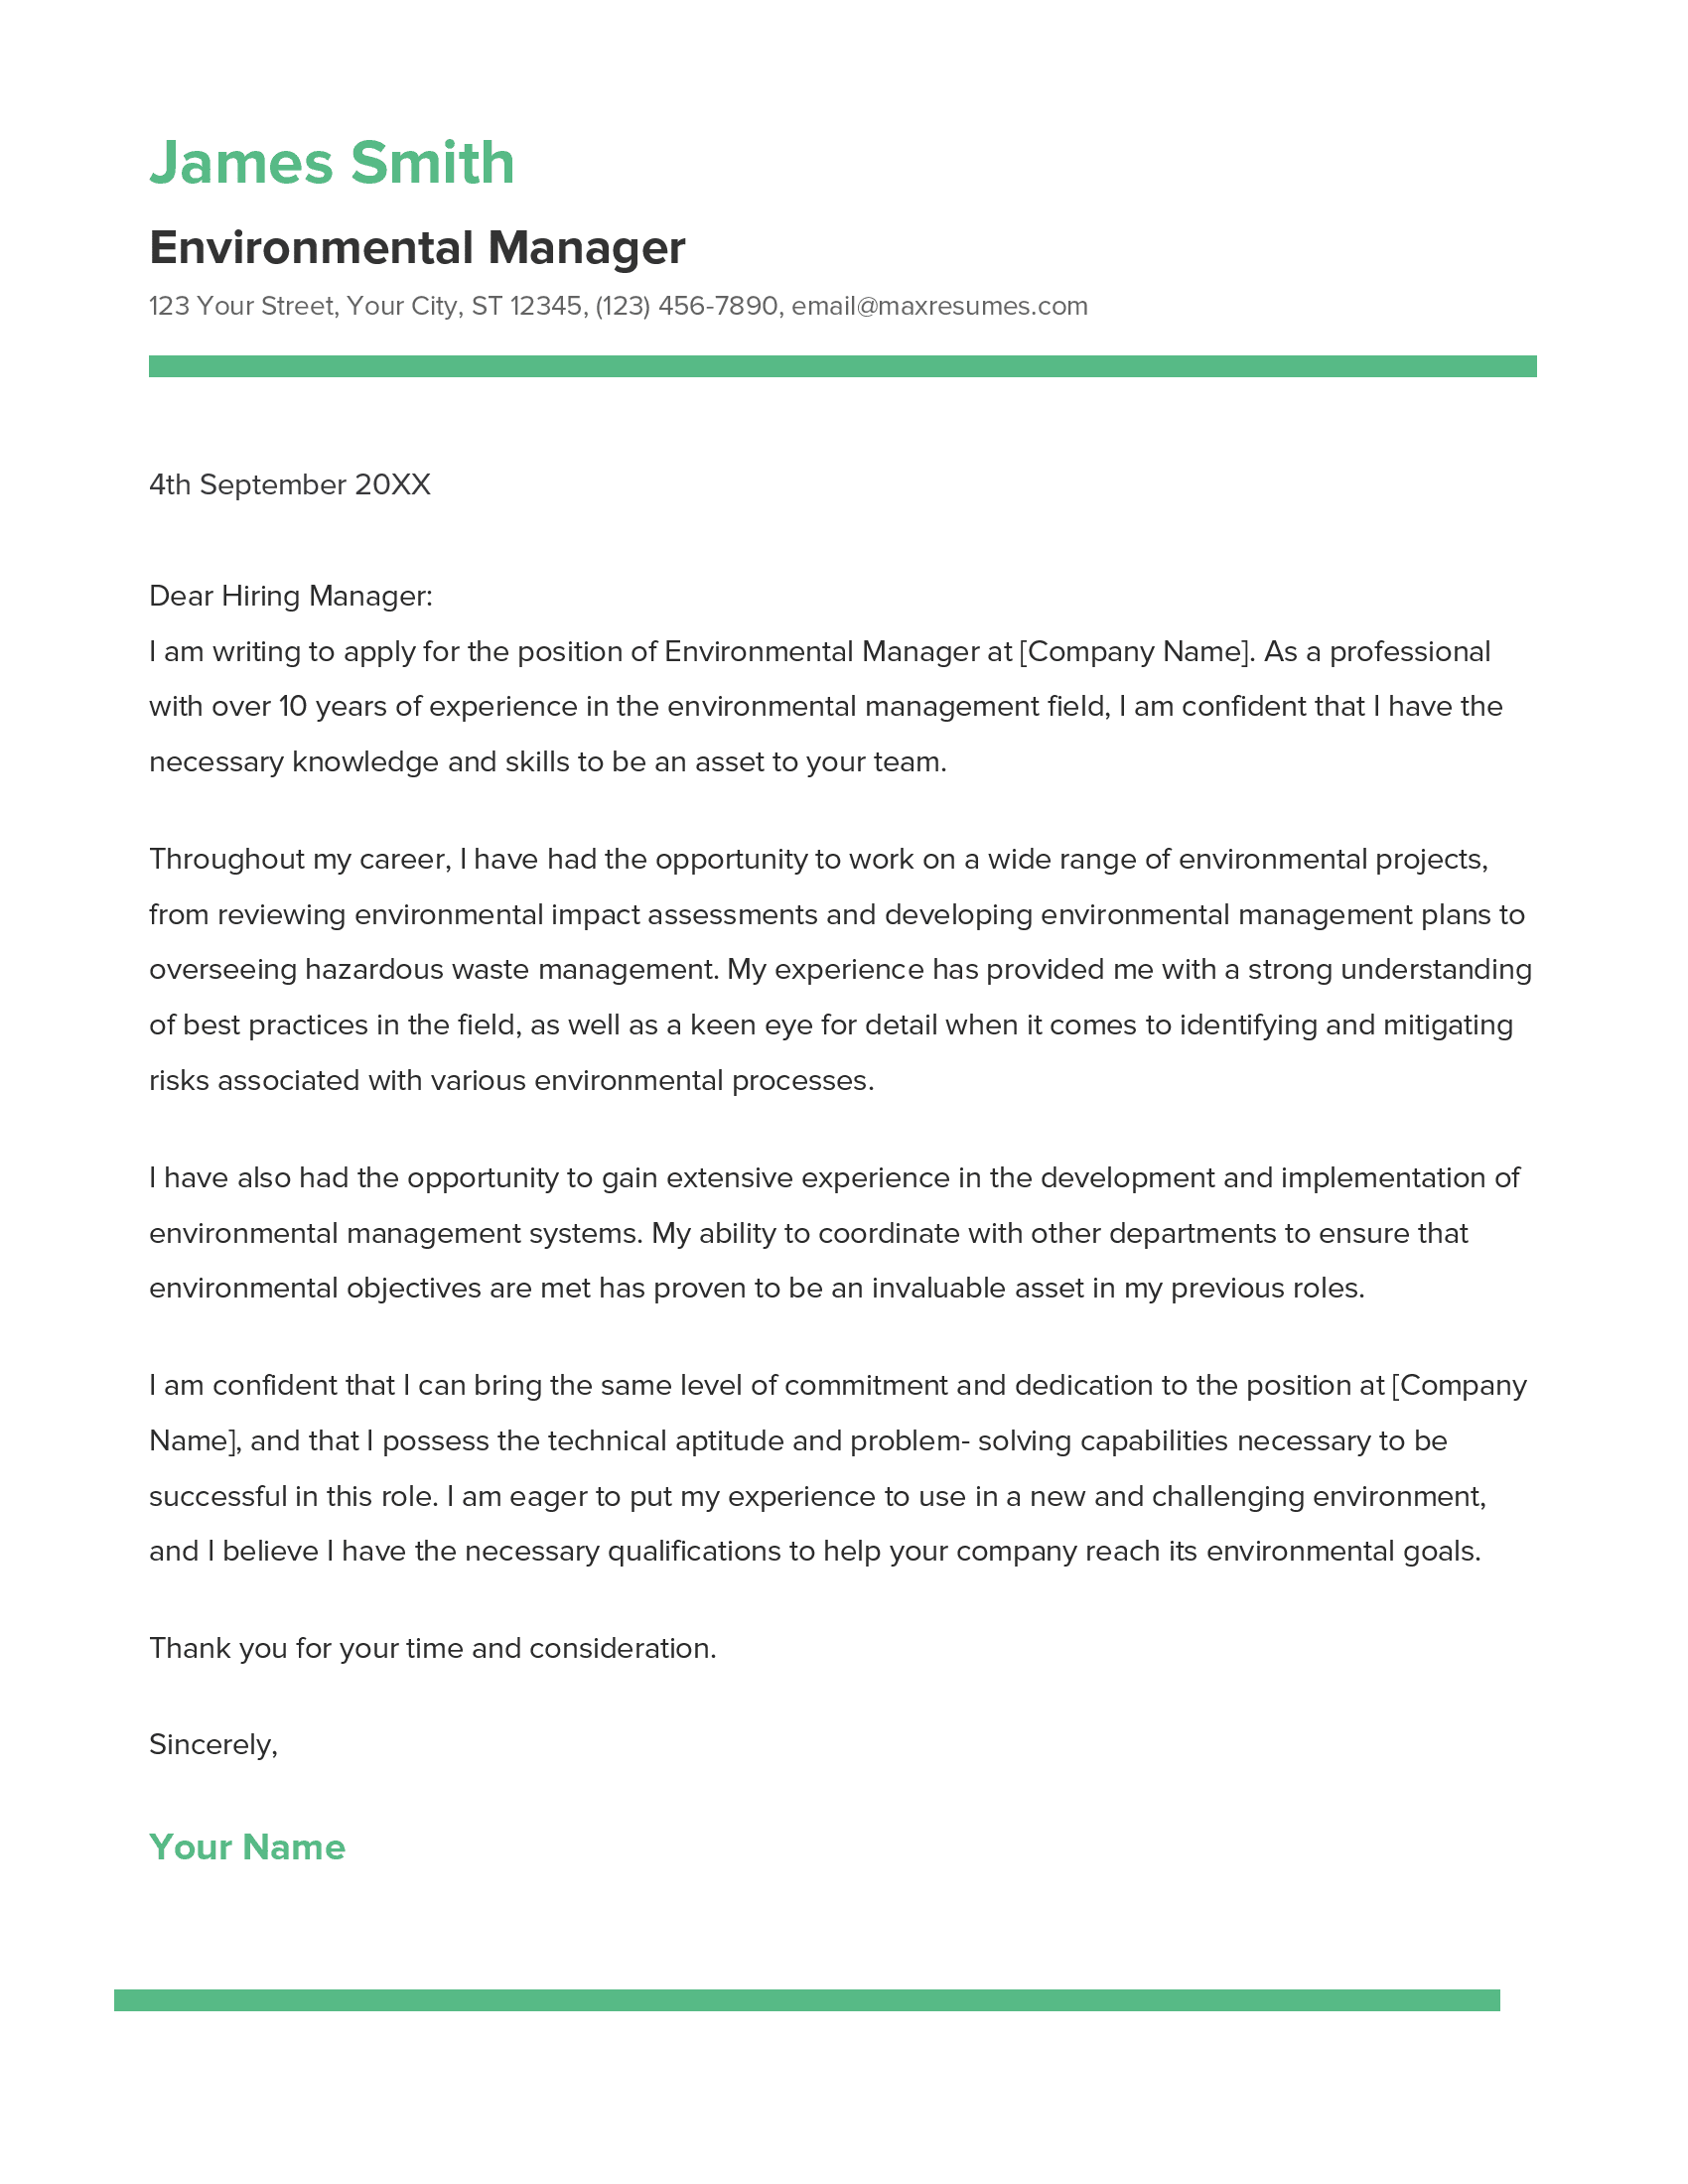 Environmental Manager Cover Letter Example